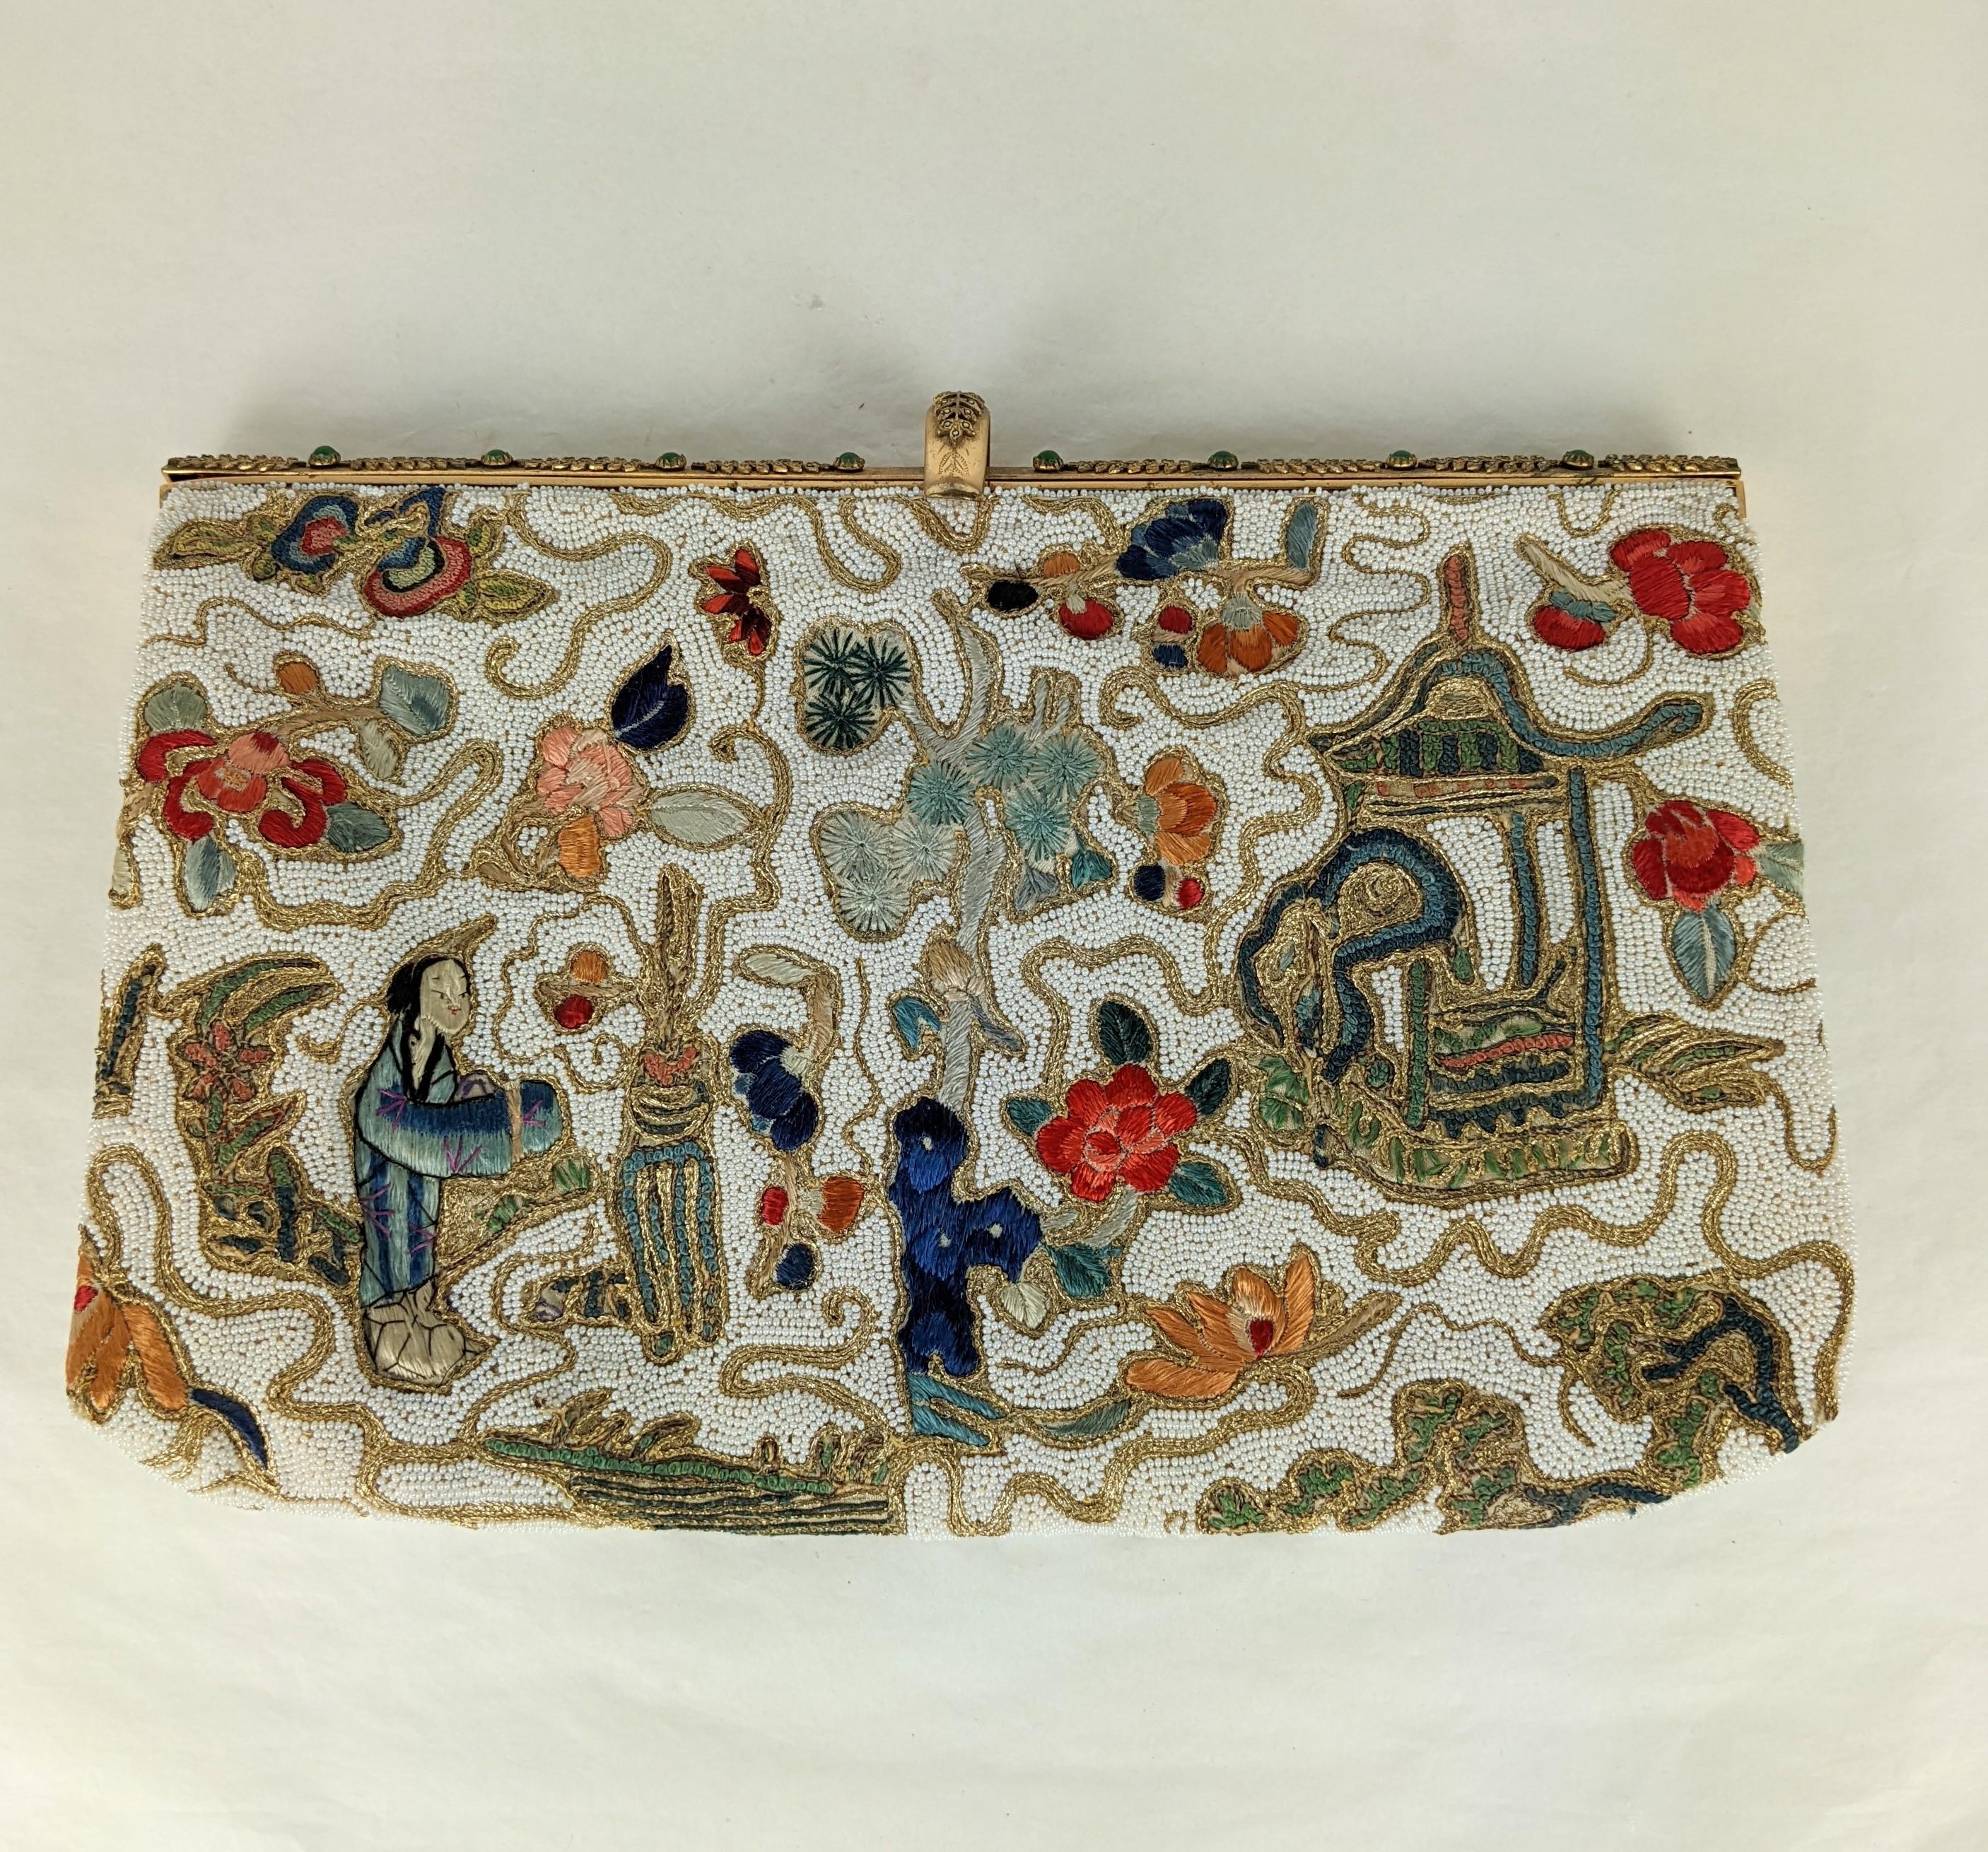 Elegant Hand Embroidered and Beaded Chinoiserie Clutch In Excellent Condition For Sale In New York, NY